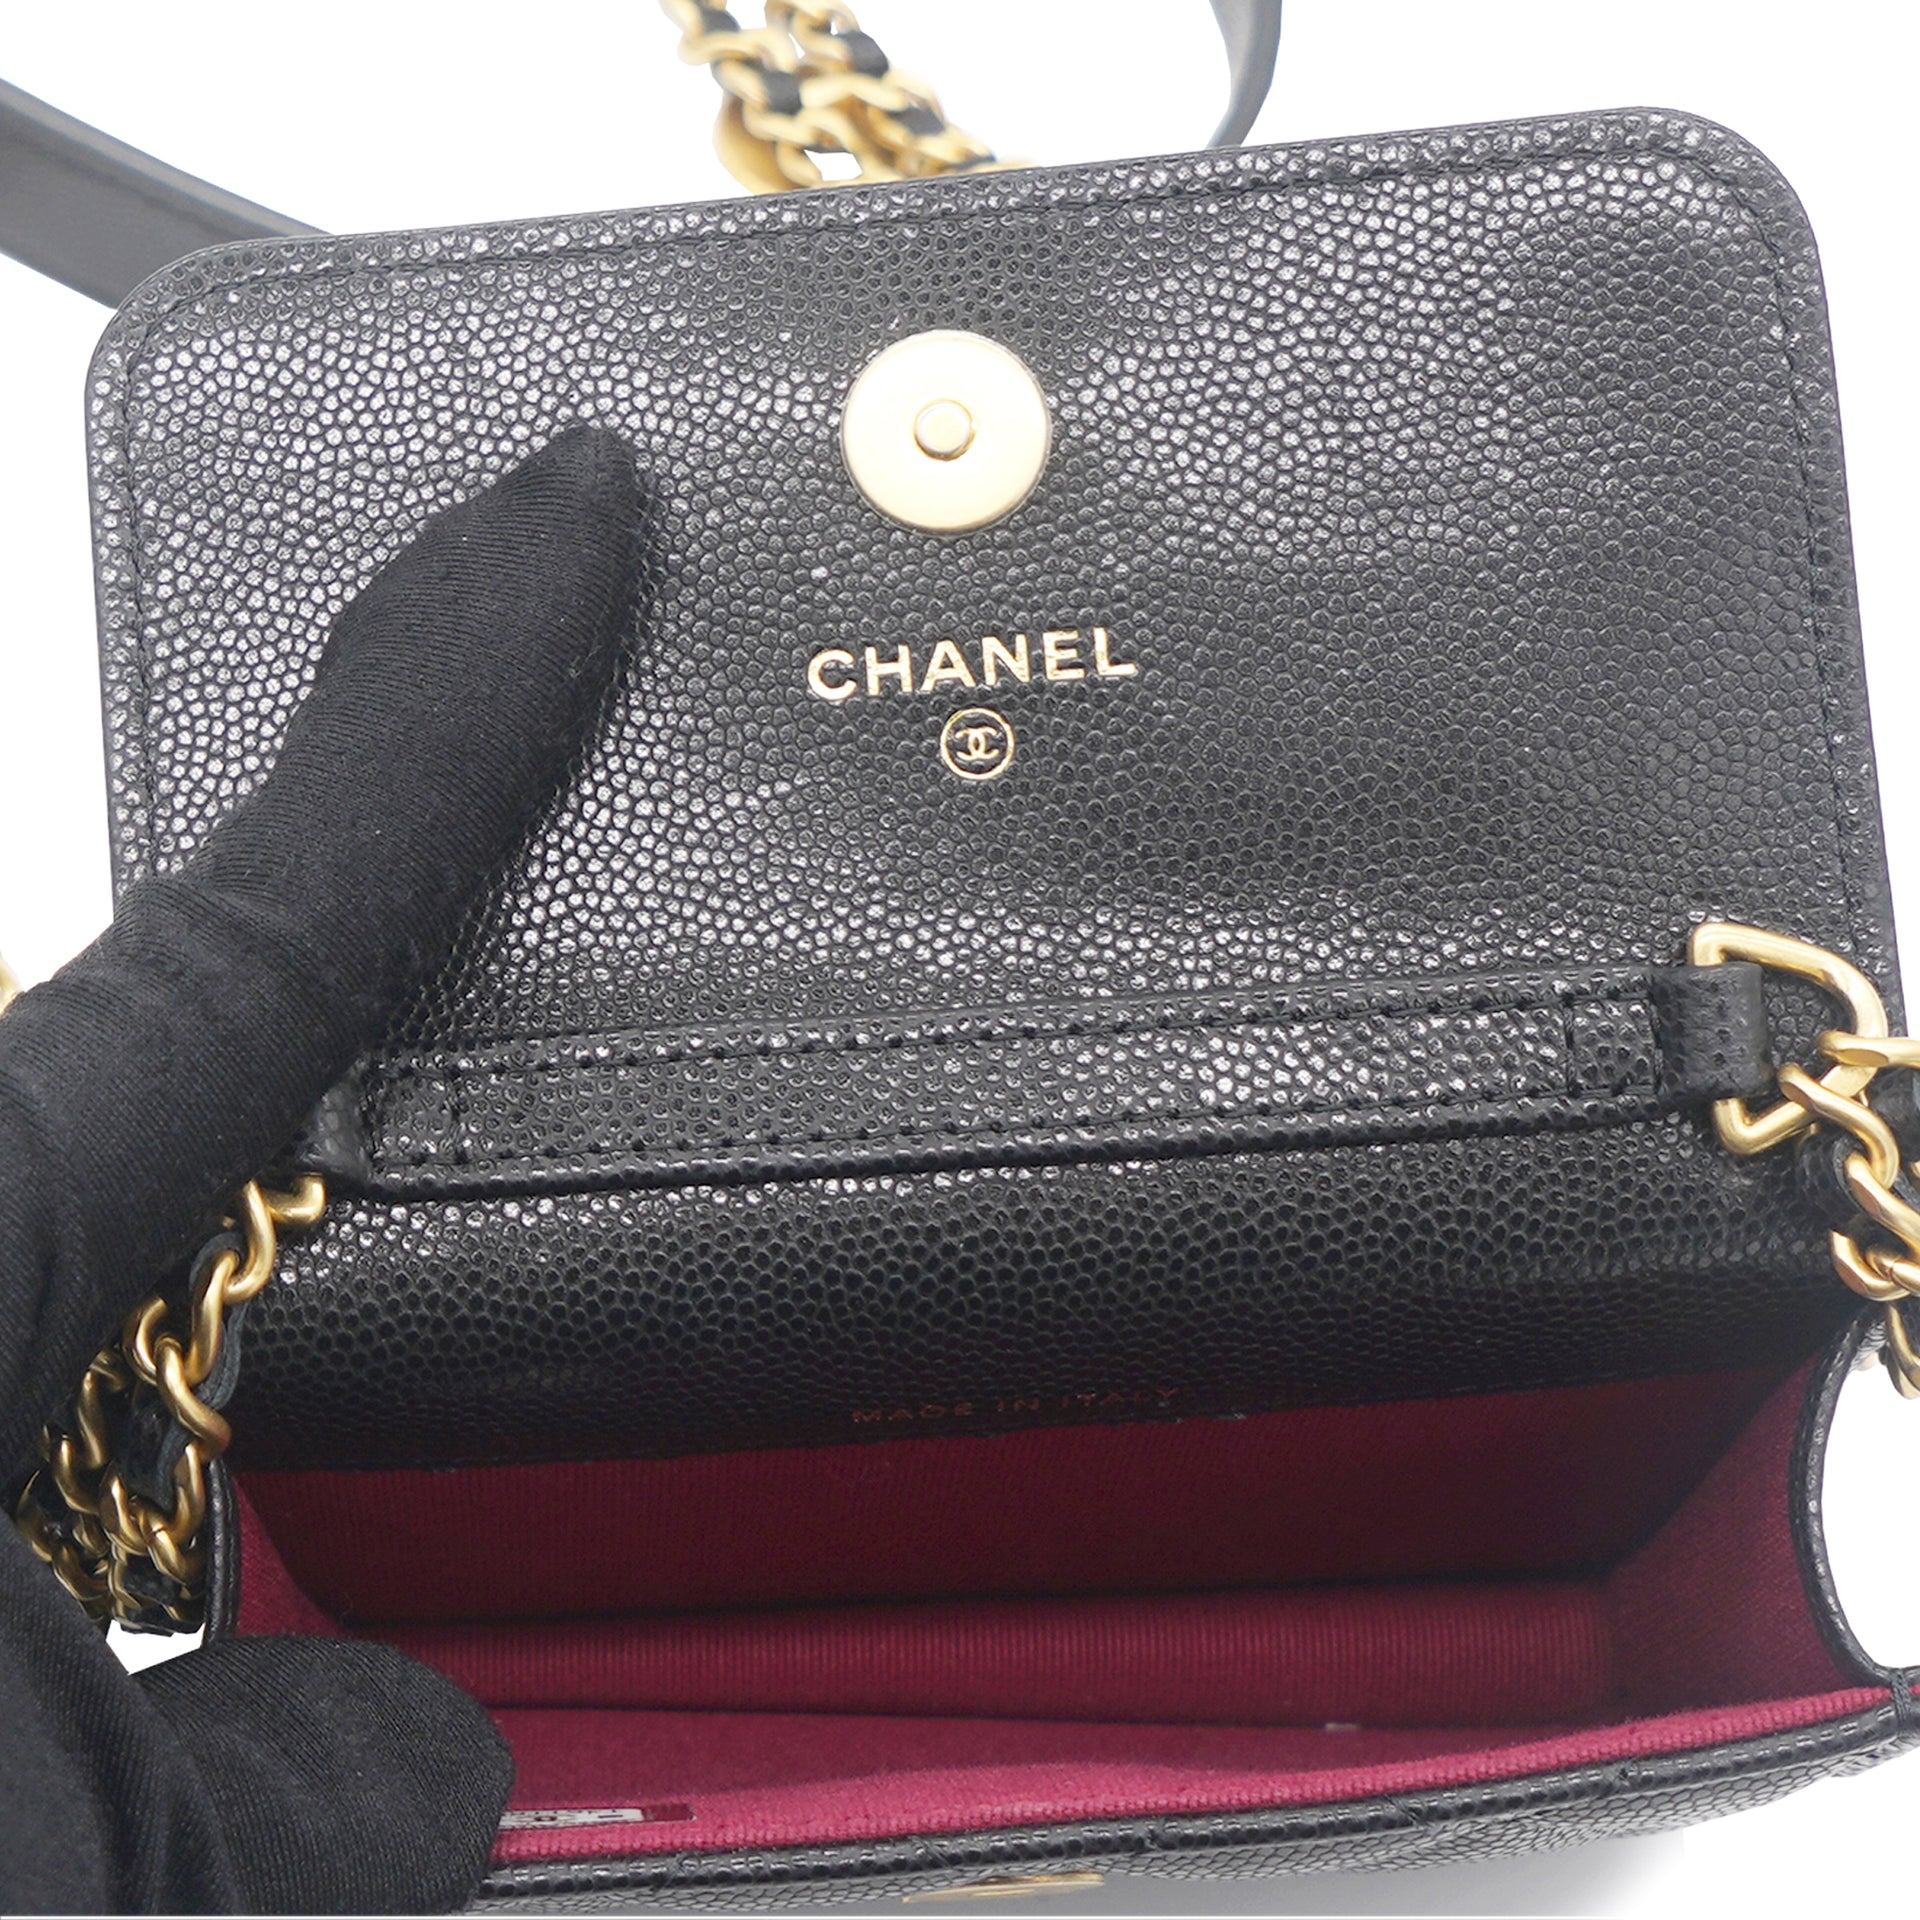 Chanel Case with Square Flap Bag